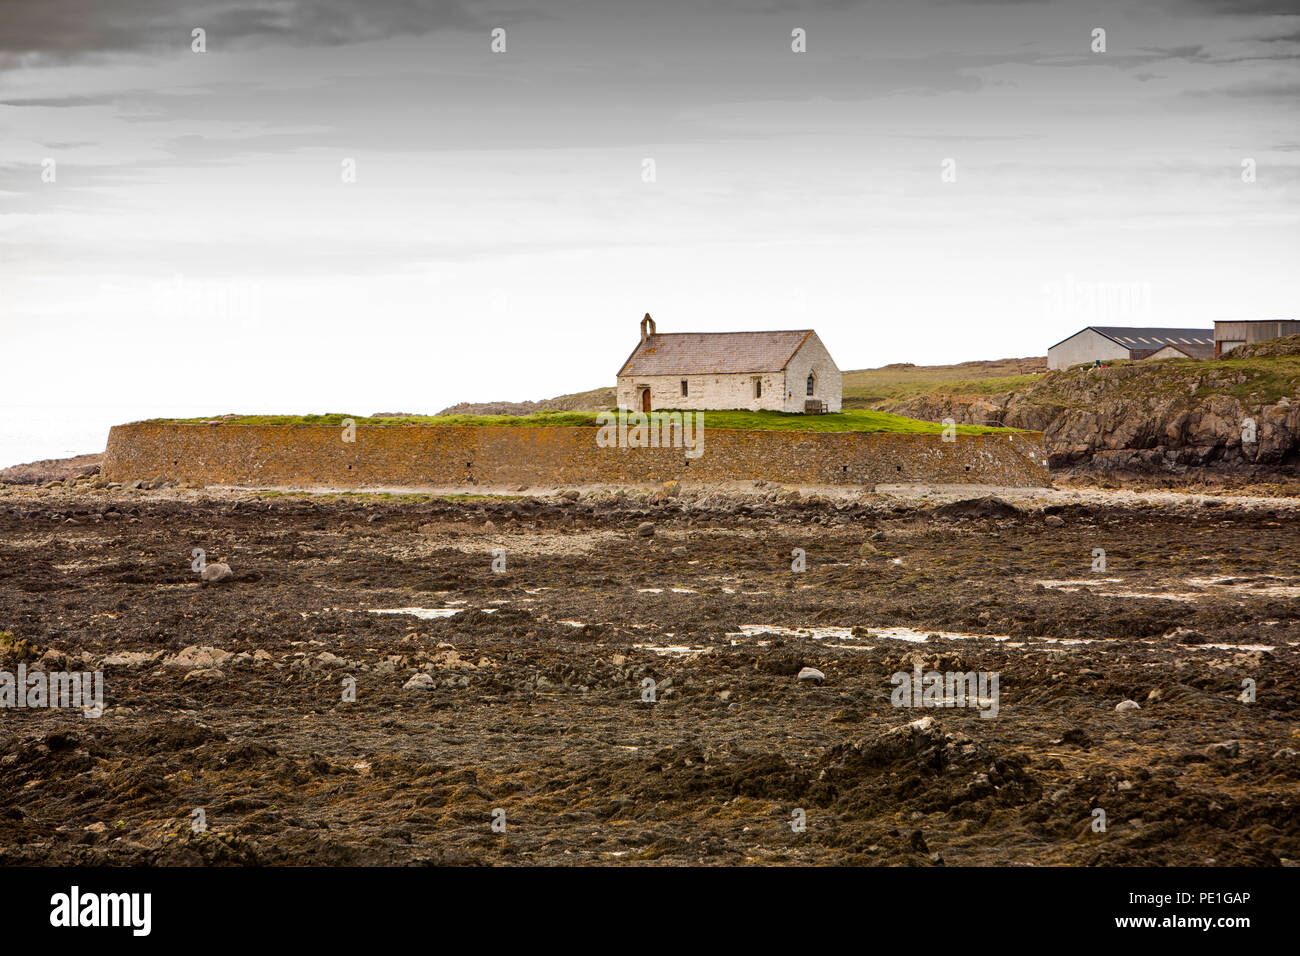 UK, Wales, Anglesey, Aberffraw, St Cwyfan's Church, on Cribinau Island surrounded by sea wall at low tide Stock Photo